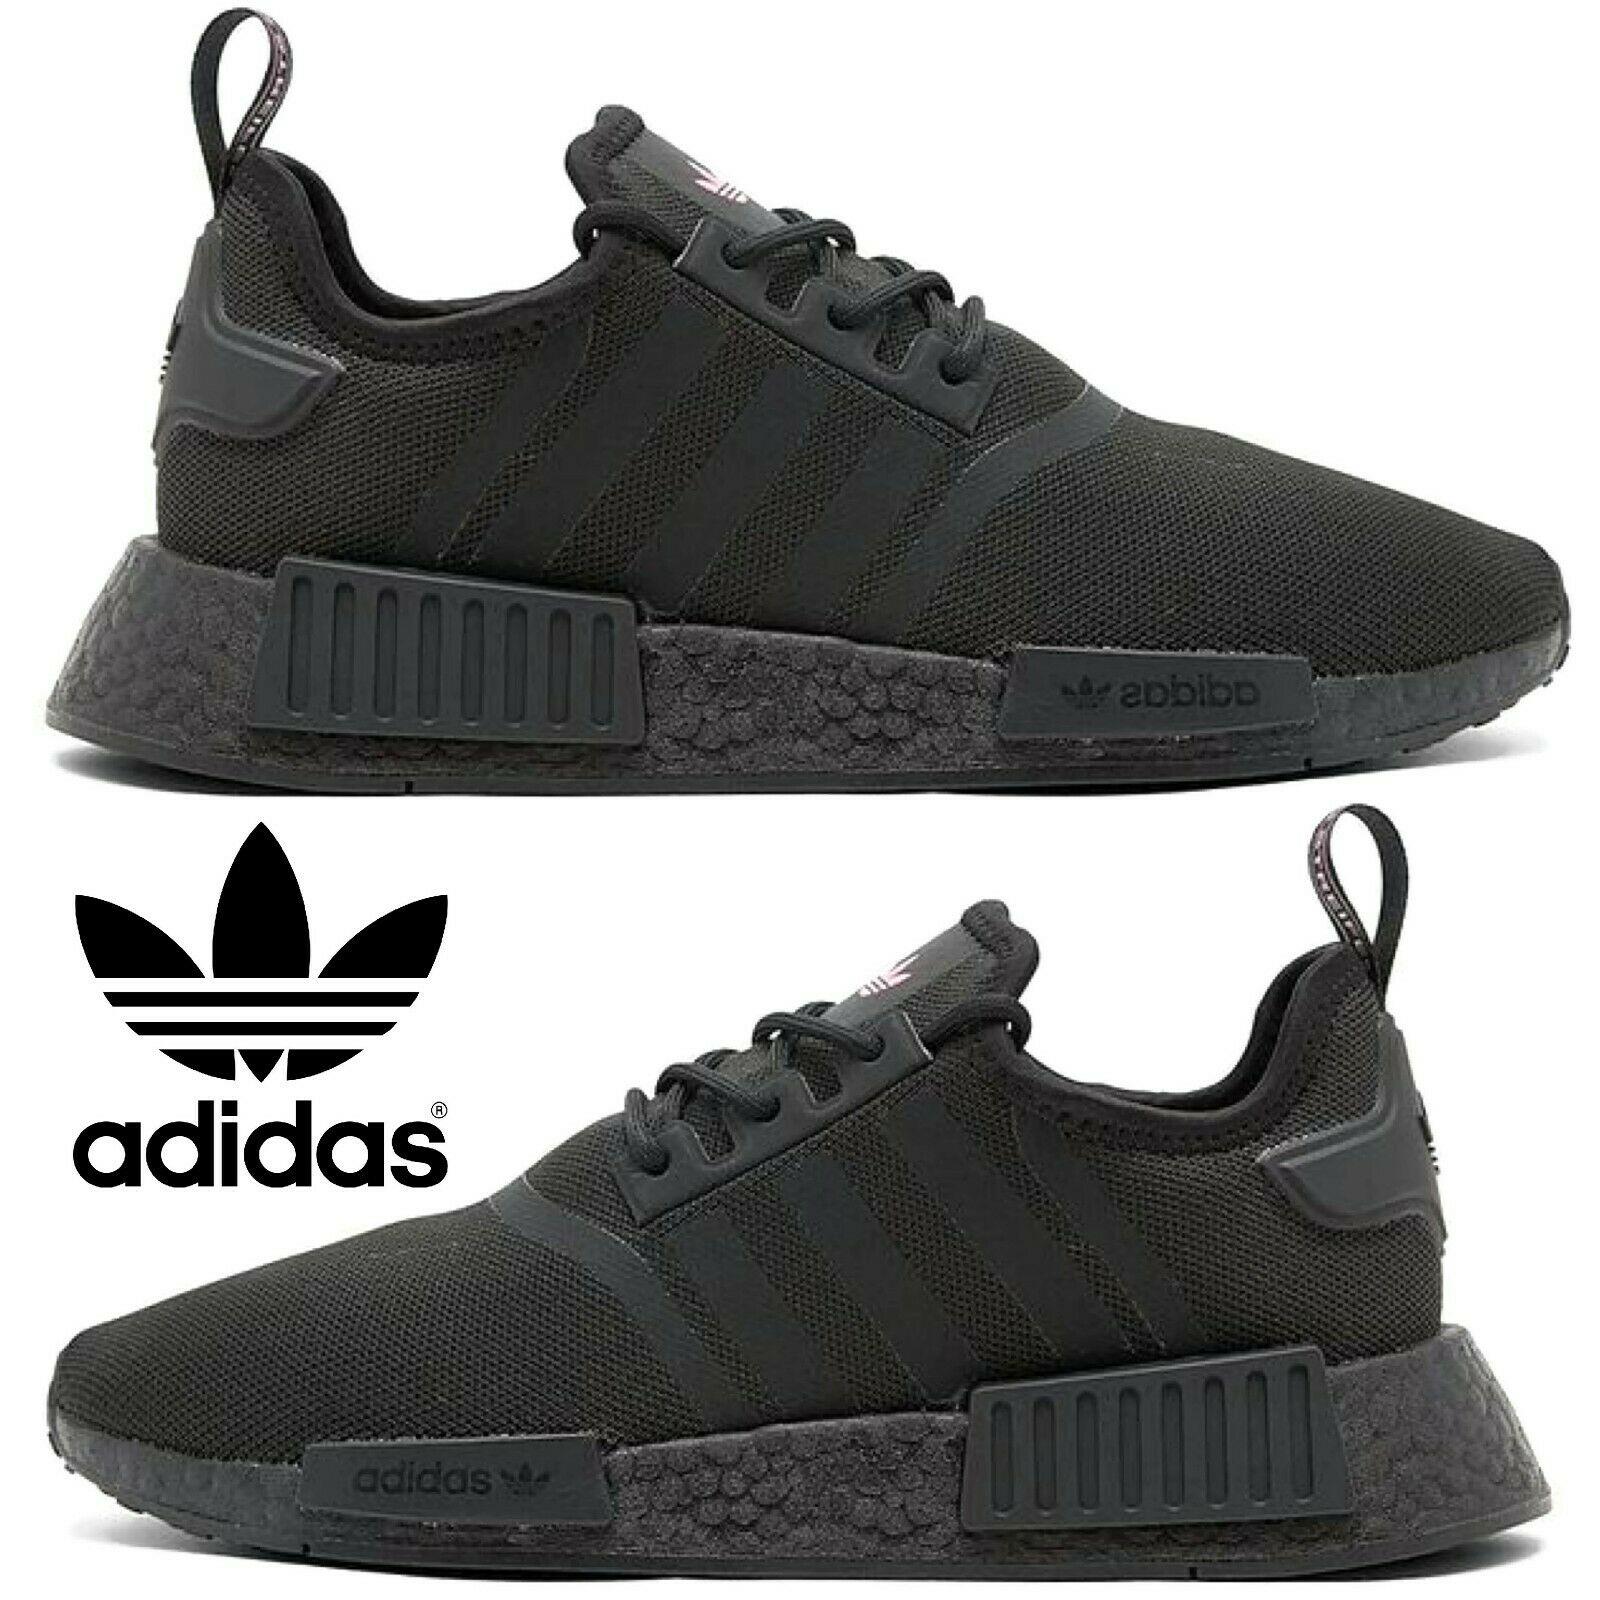 Adidas Originals Nmd R1 Women s Sneakers Casual Shoes Sport Gym Running Black